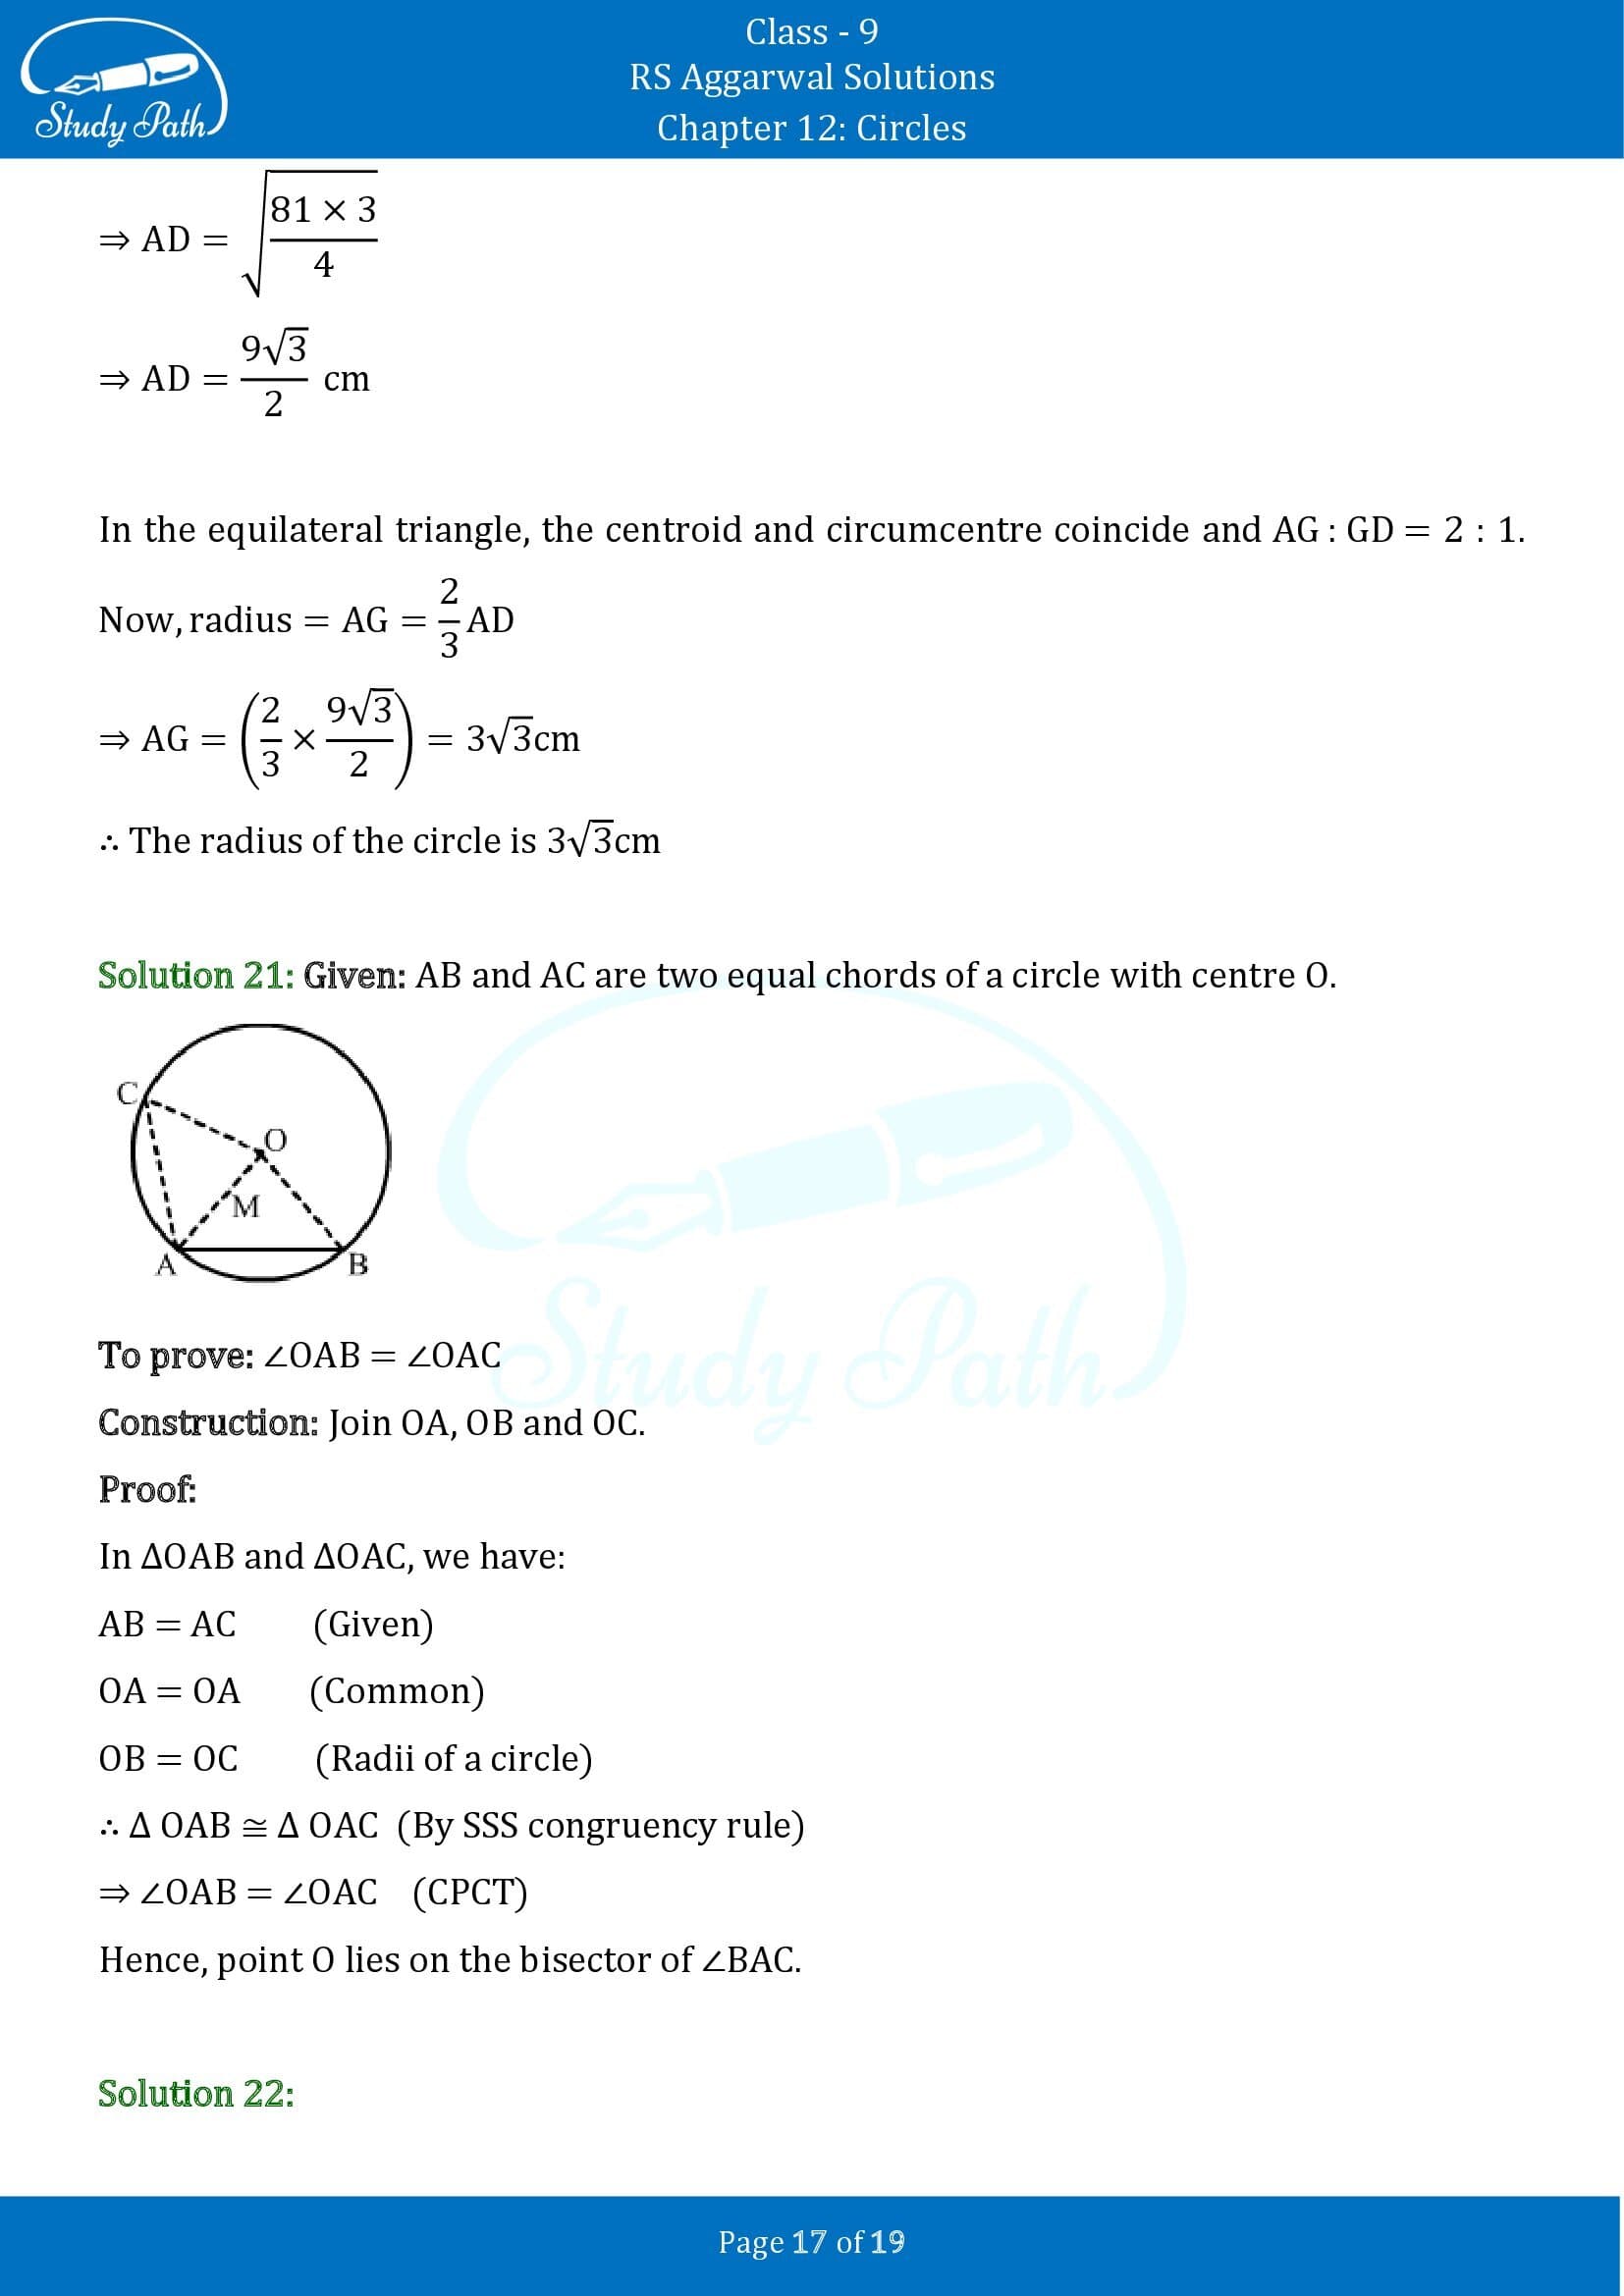 RS Aggarwal Solutions Class 9 Chapter 12 Circles Exercise 12A 00017